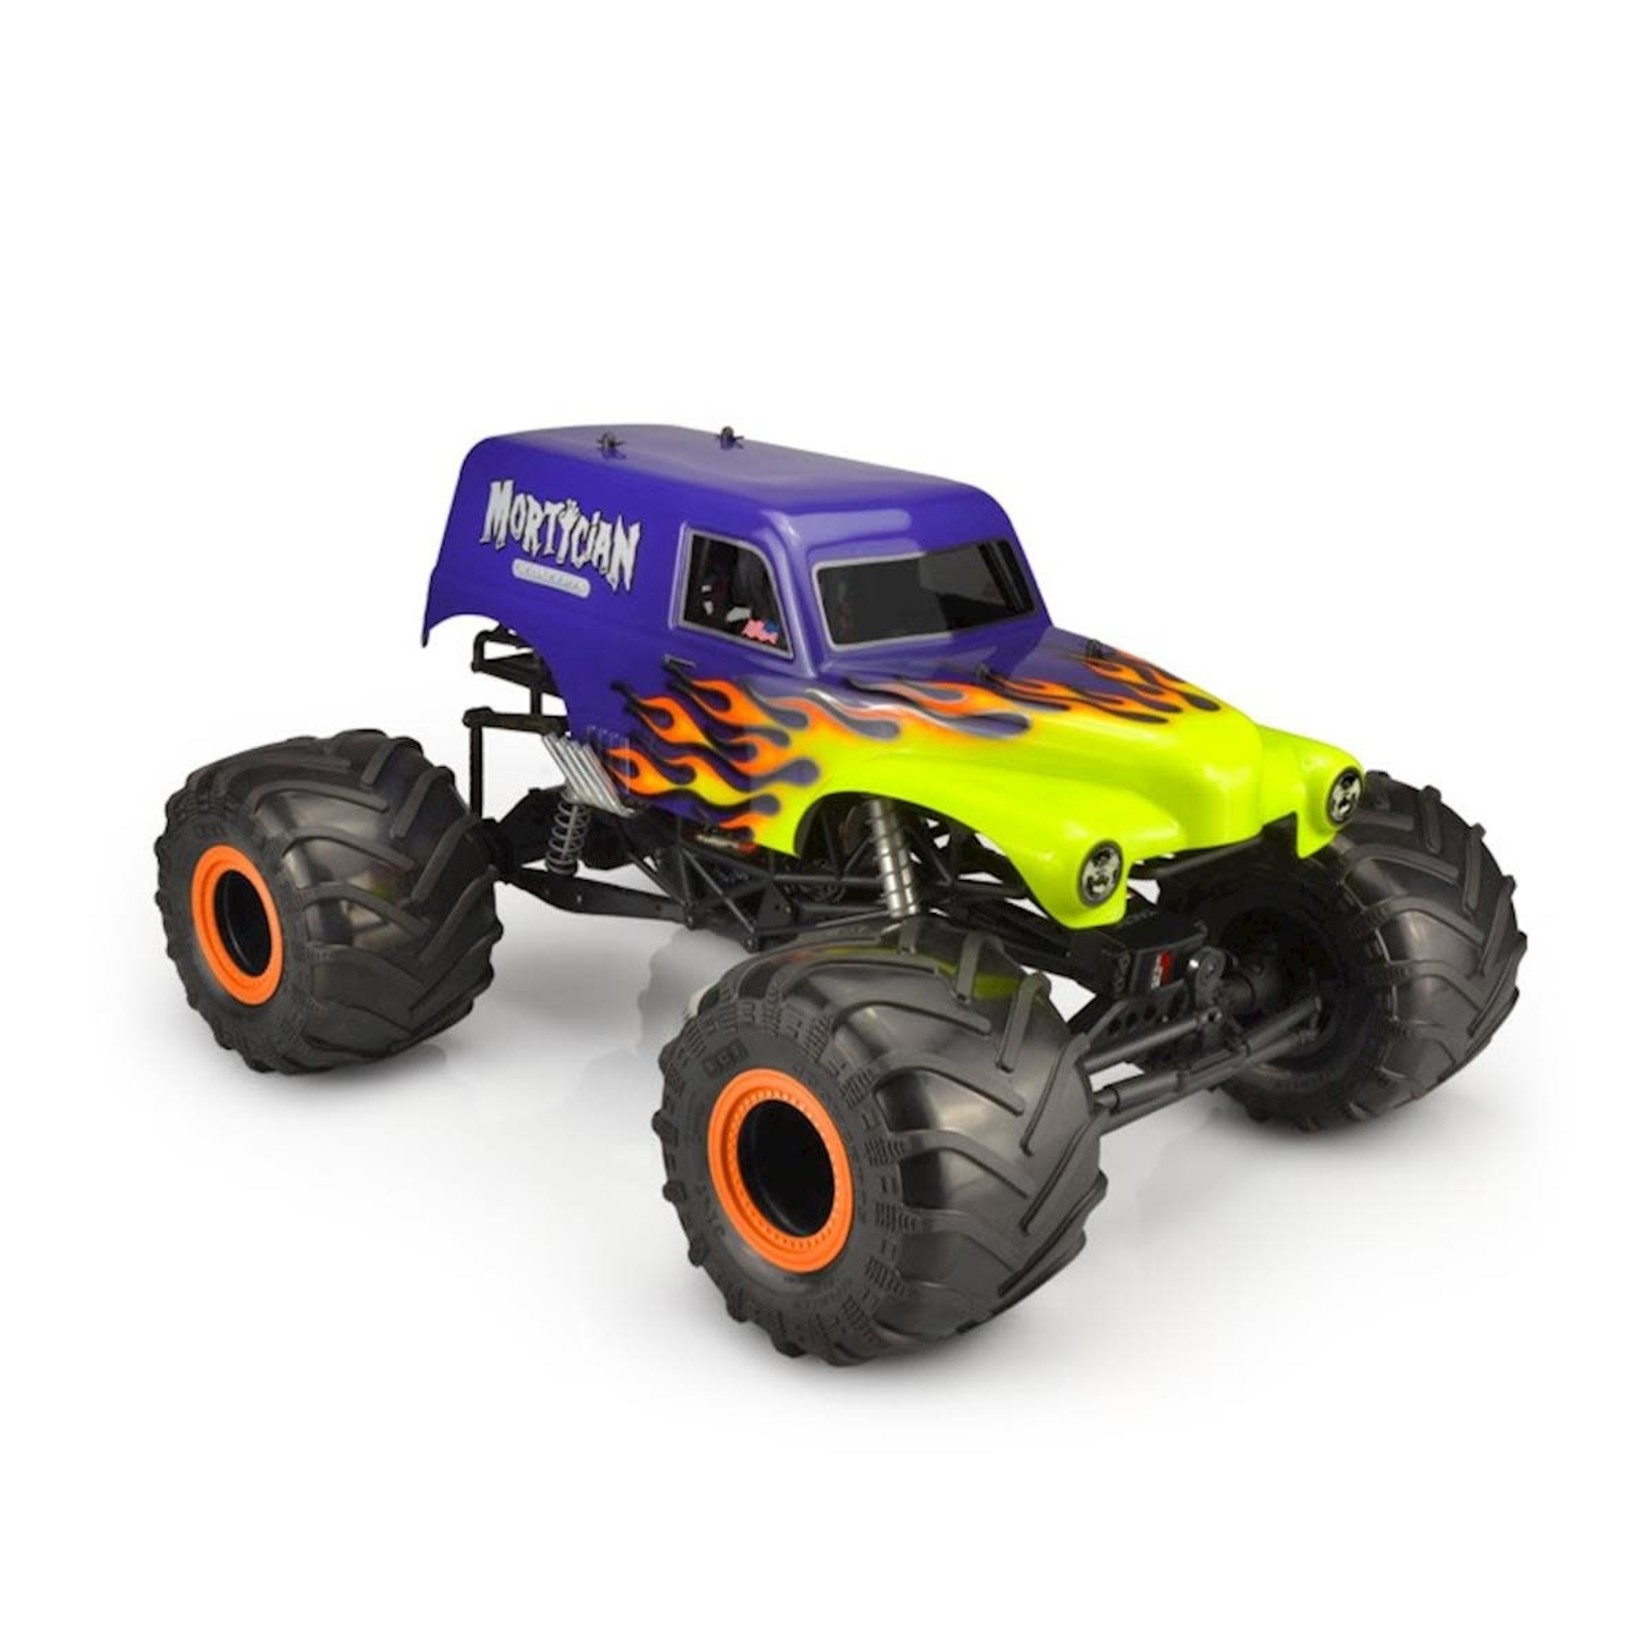 JConcepts JConcepts Mortician Monster Truck Body (Clear) (12.5") #0426